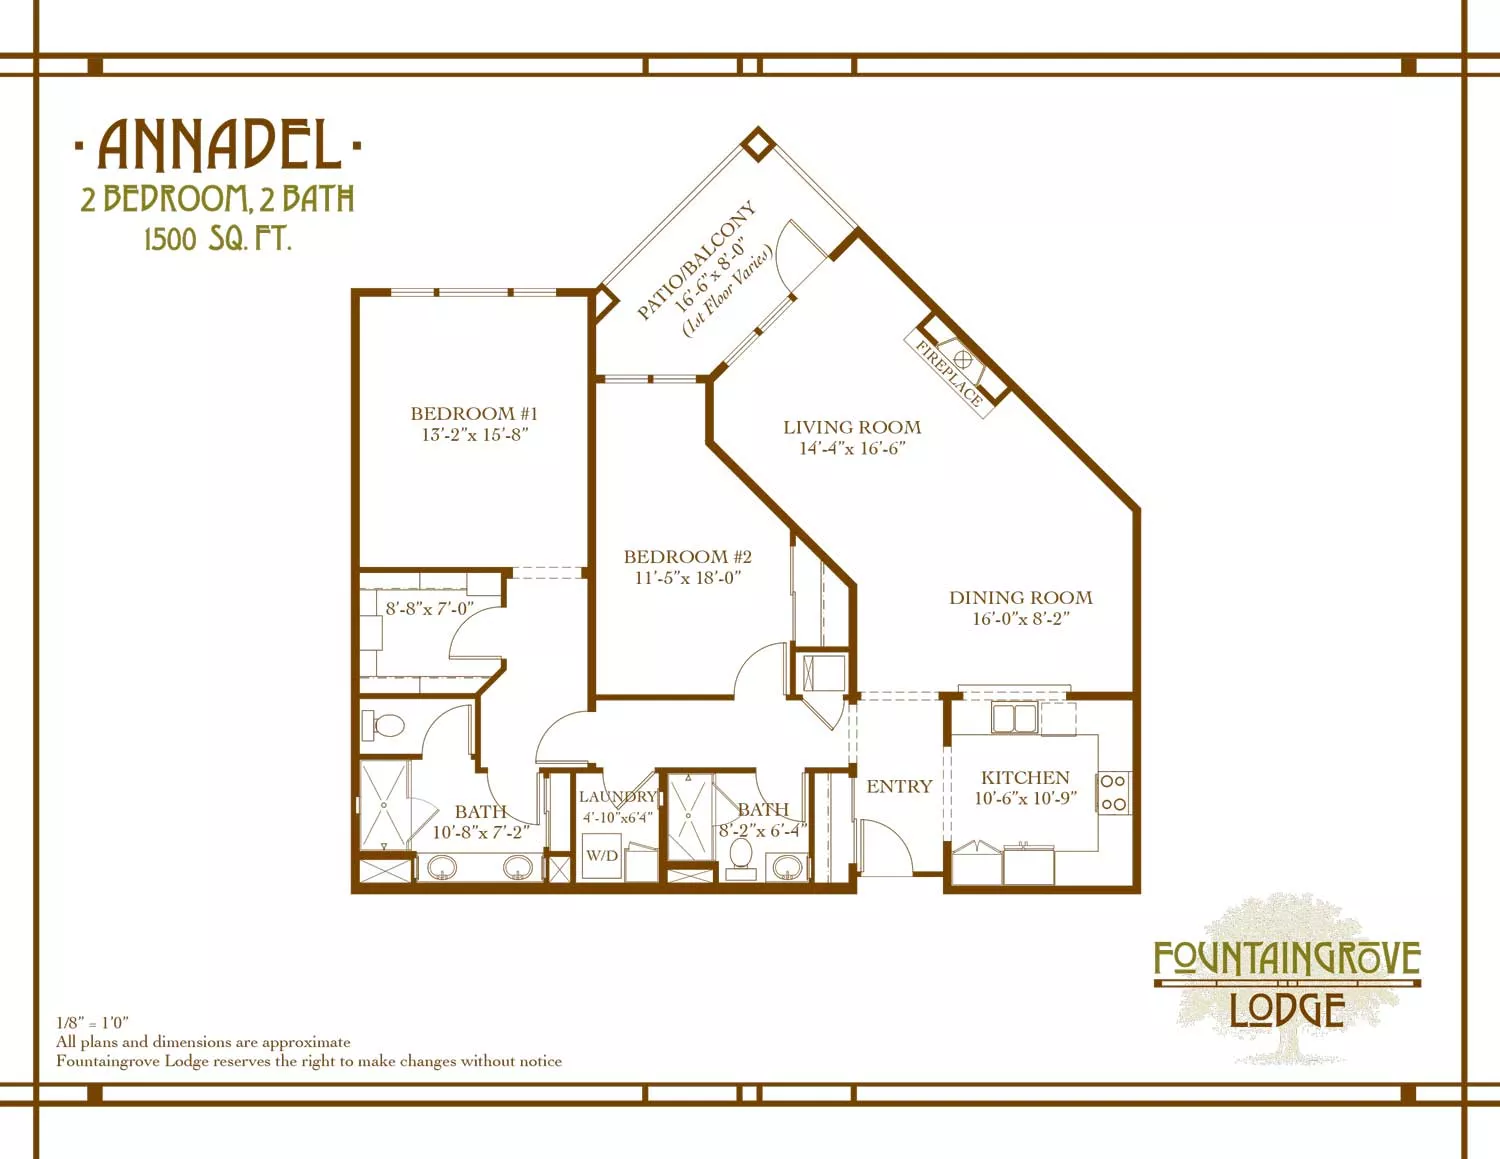 Annadel two bedroom and two bath floor plan